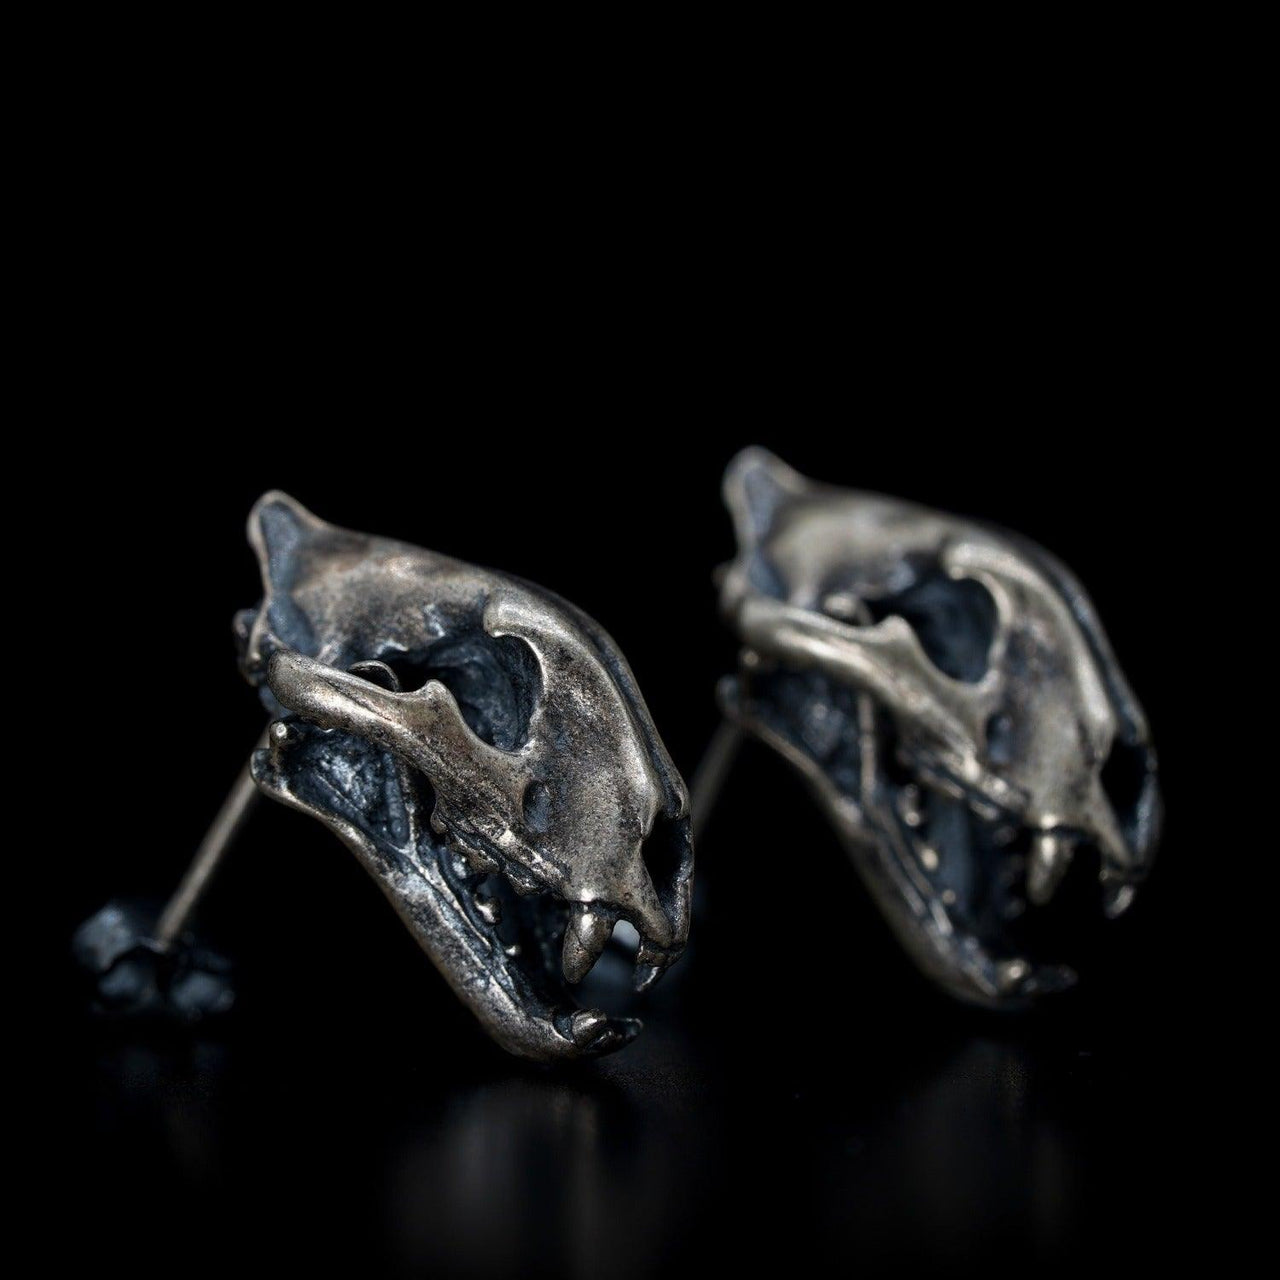 Tiger Skull Stud earrings in 925 Sterling Silver by Black Feather Design